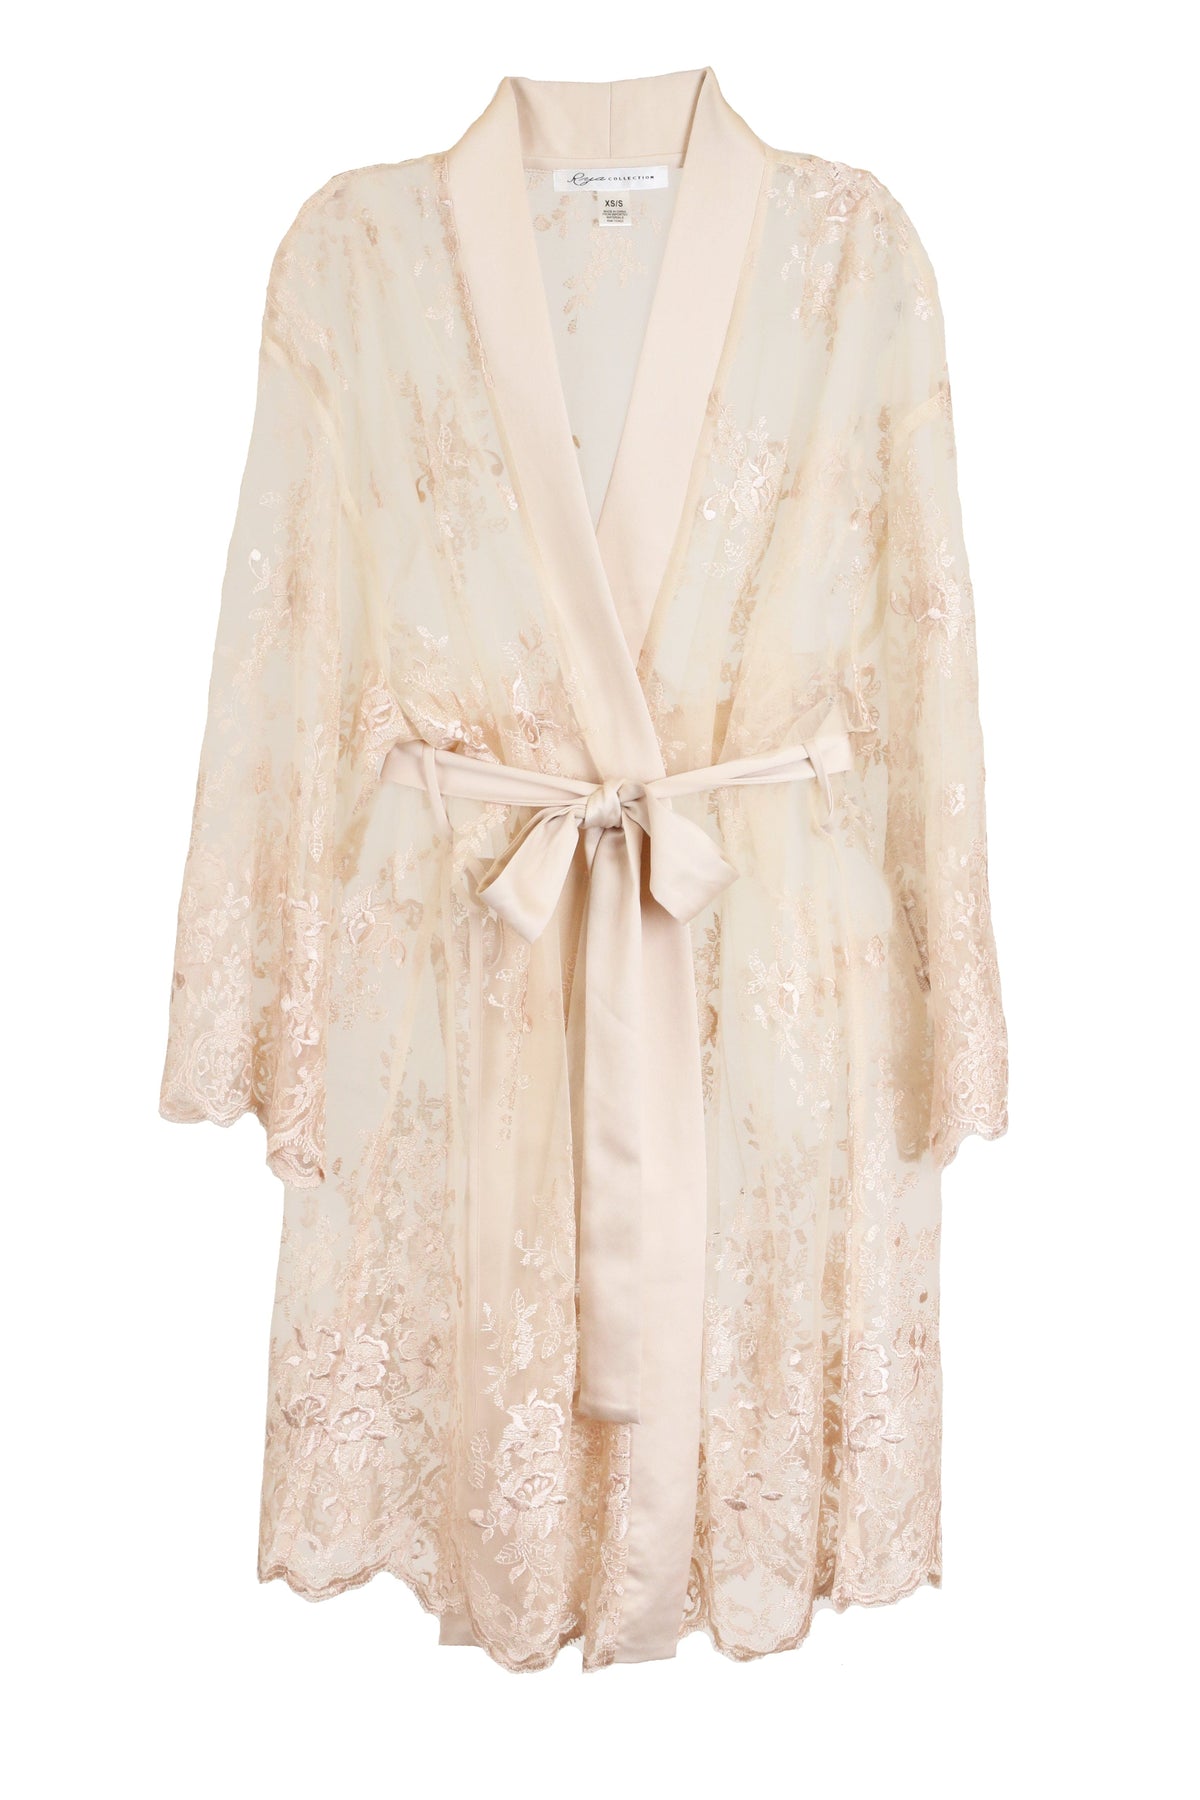 Rya Collection Robes Champagne / XS/S Darling Cover Up - Champagne